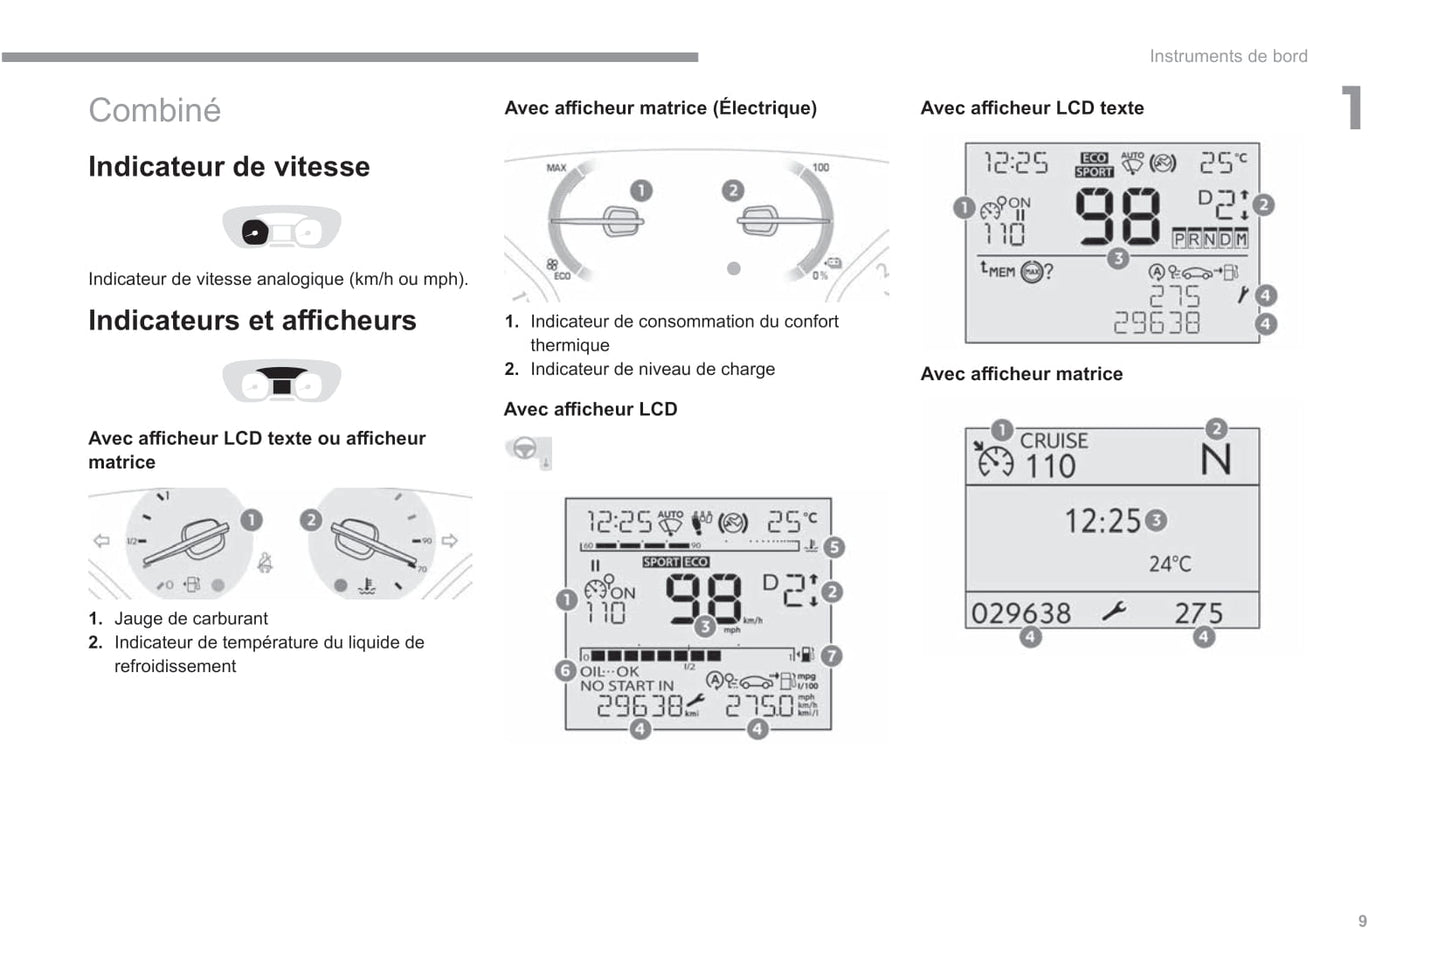 2022-2023 Fiat Scudo Ulysse Owner's Manual | French